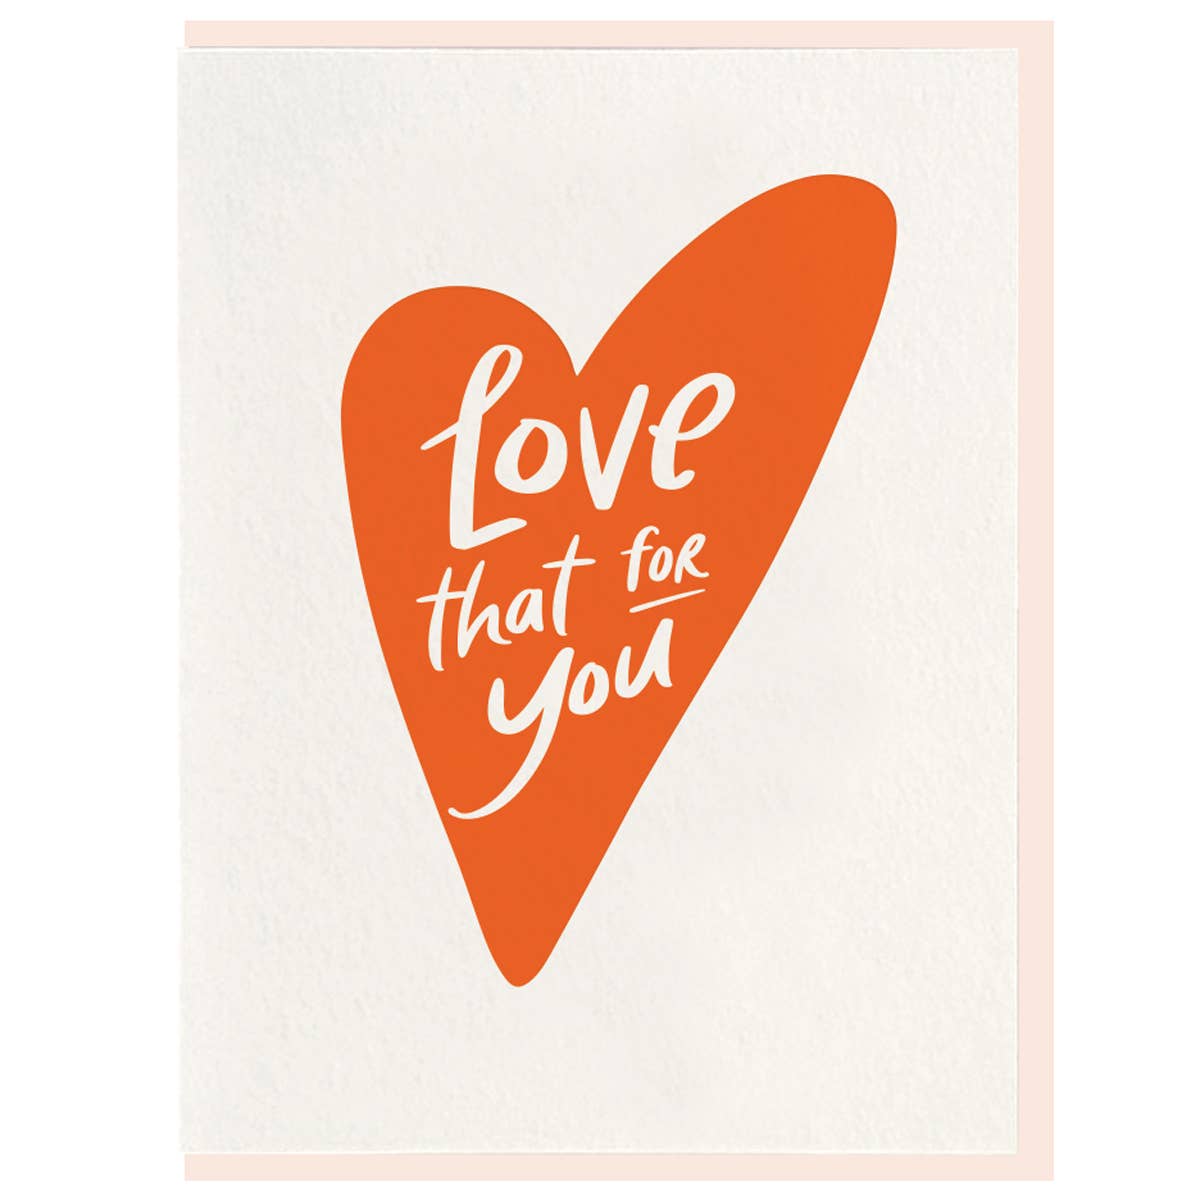 Love That For You - Letterpress Greeting Card